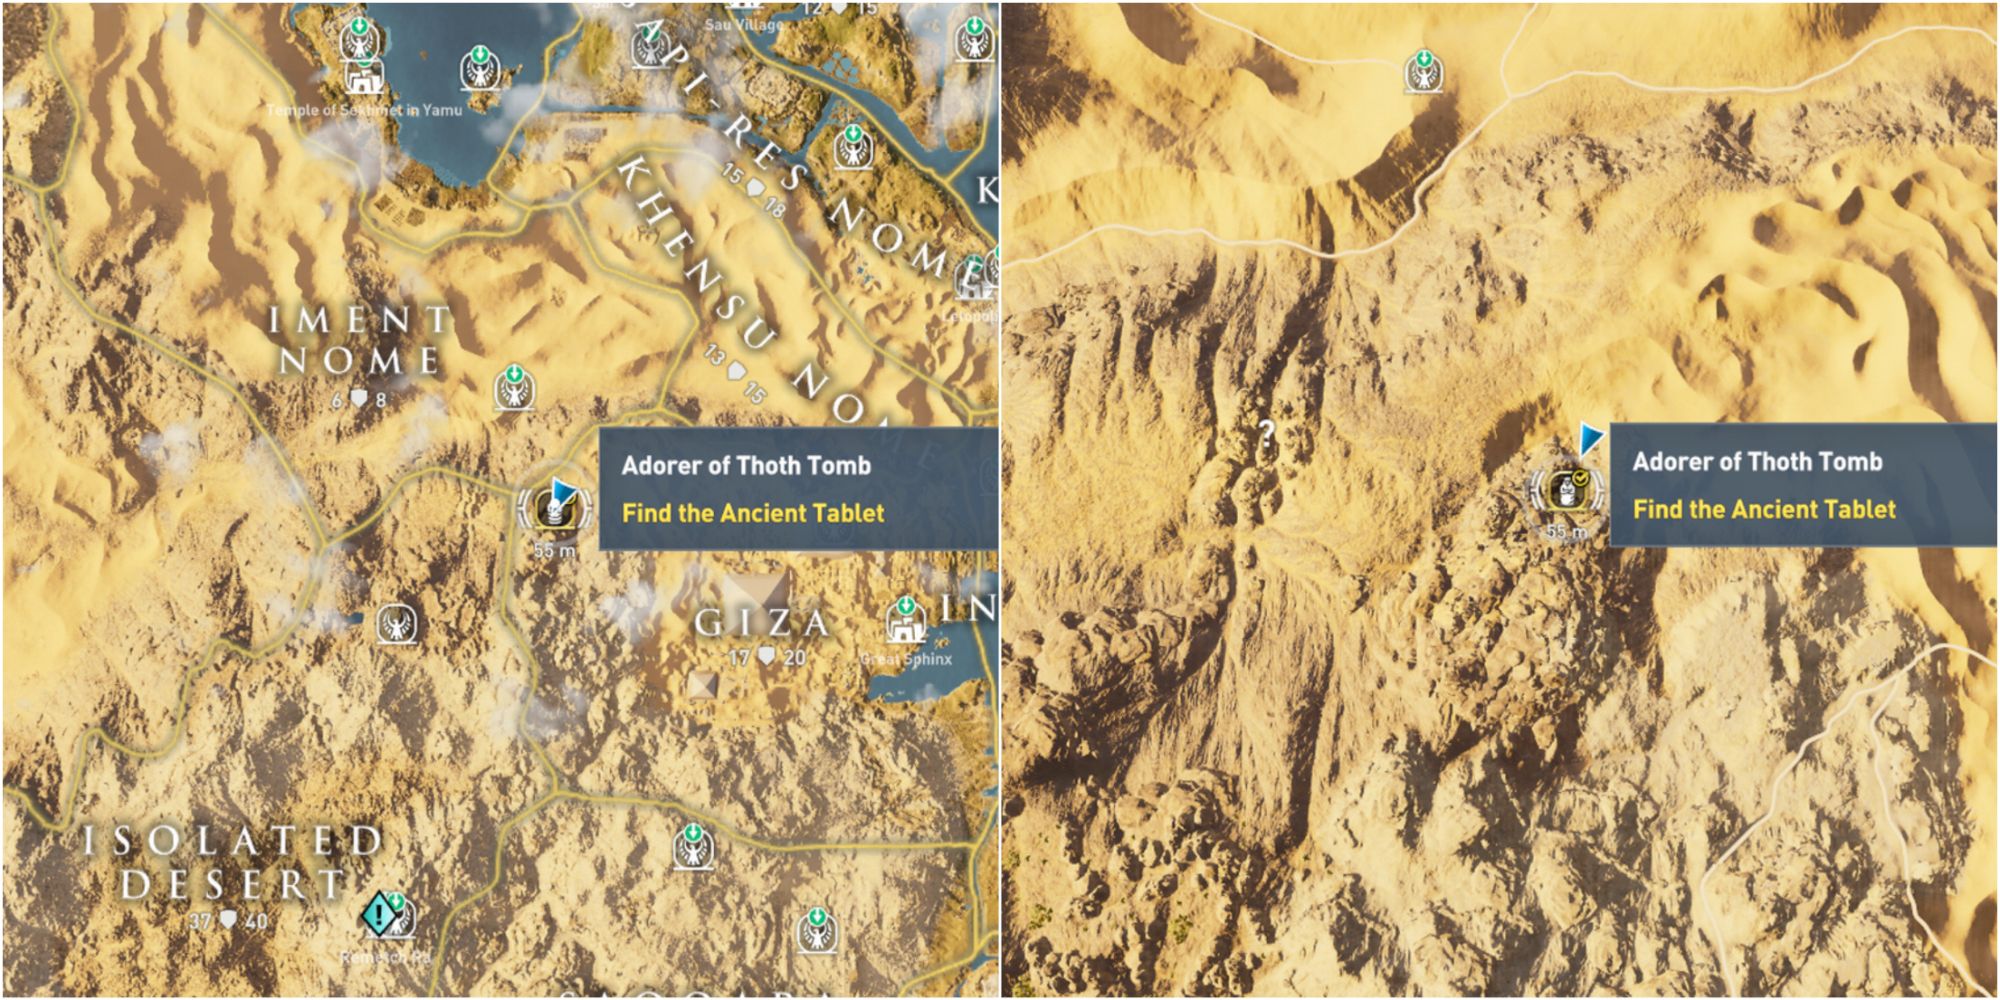 Assassin's Creed Origins Split Image Showing Adorer Of Thoth Tomb Map Location